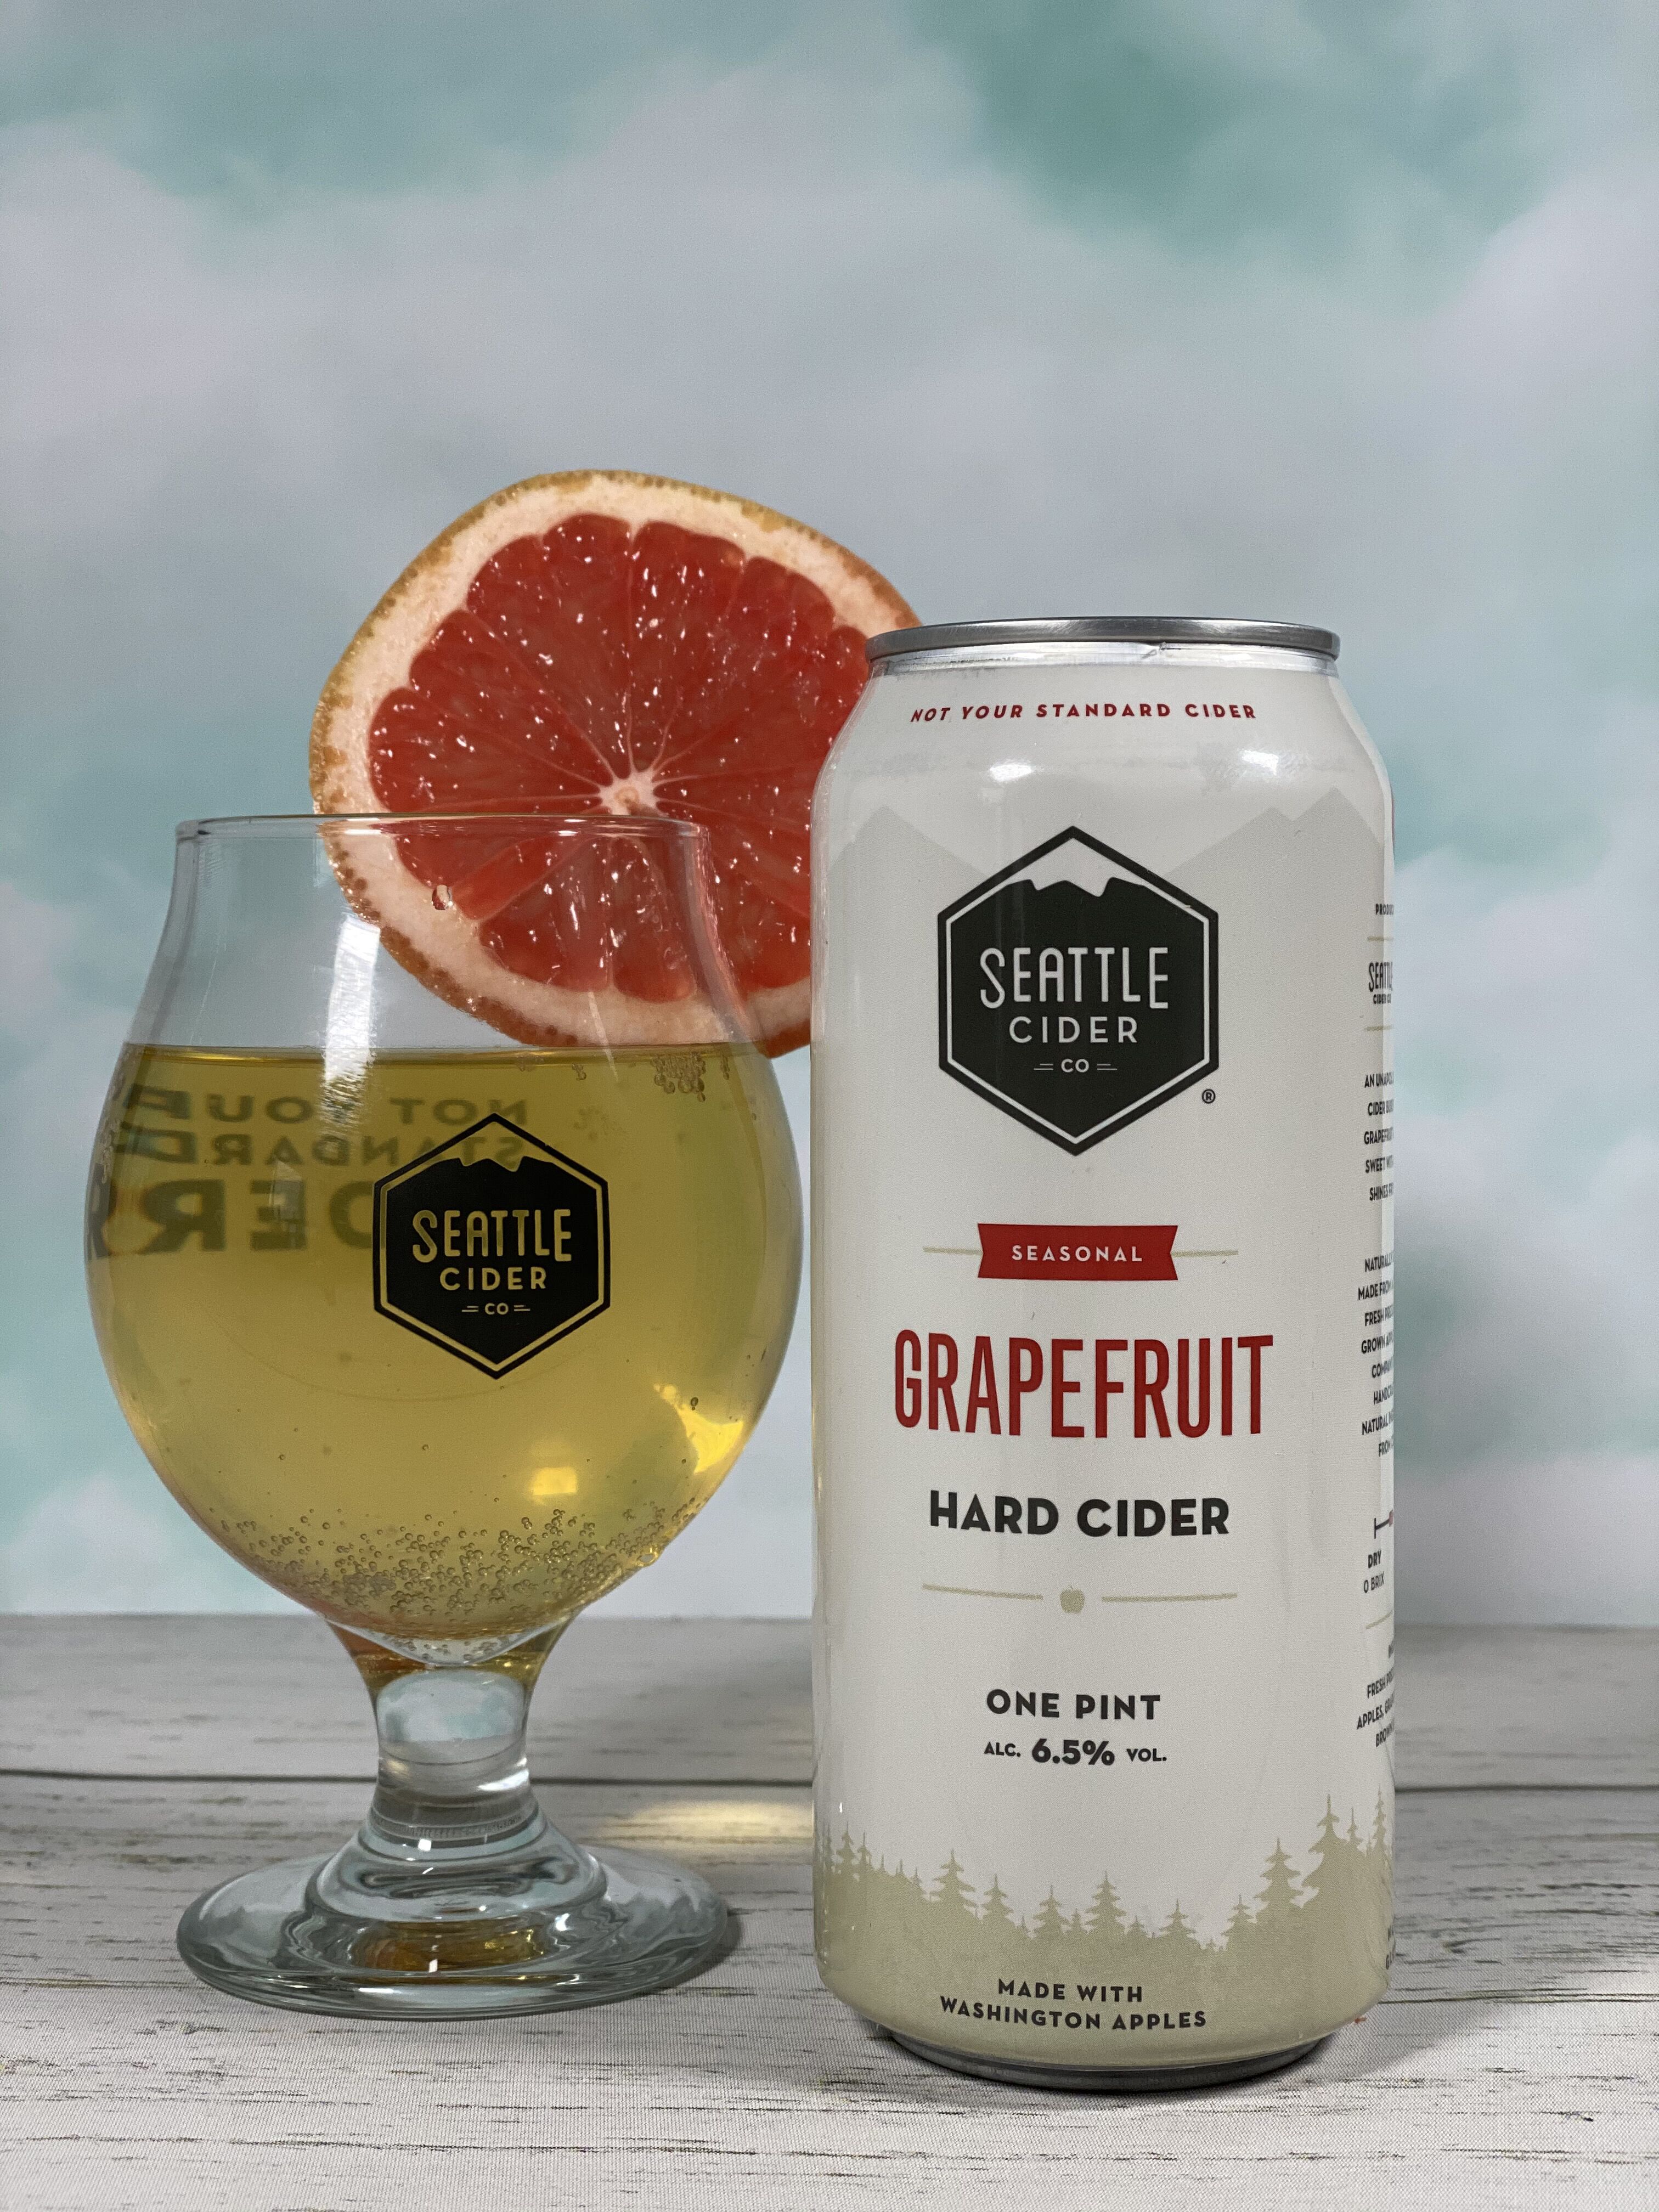 Seattle Cider Co. Adds Grapefruit Hard Cider to Seasonal Lineup | The